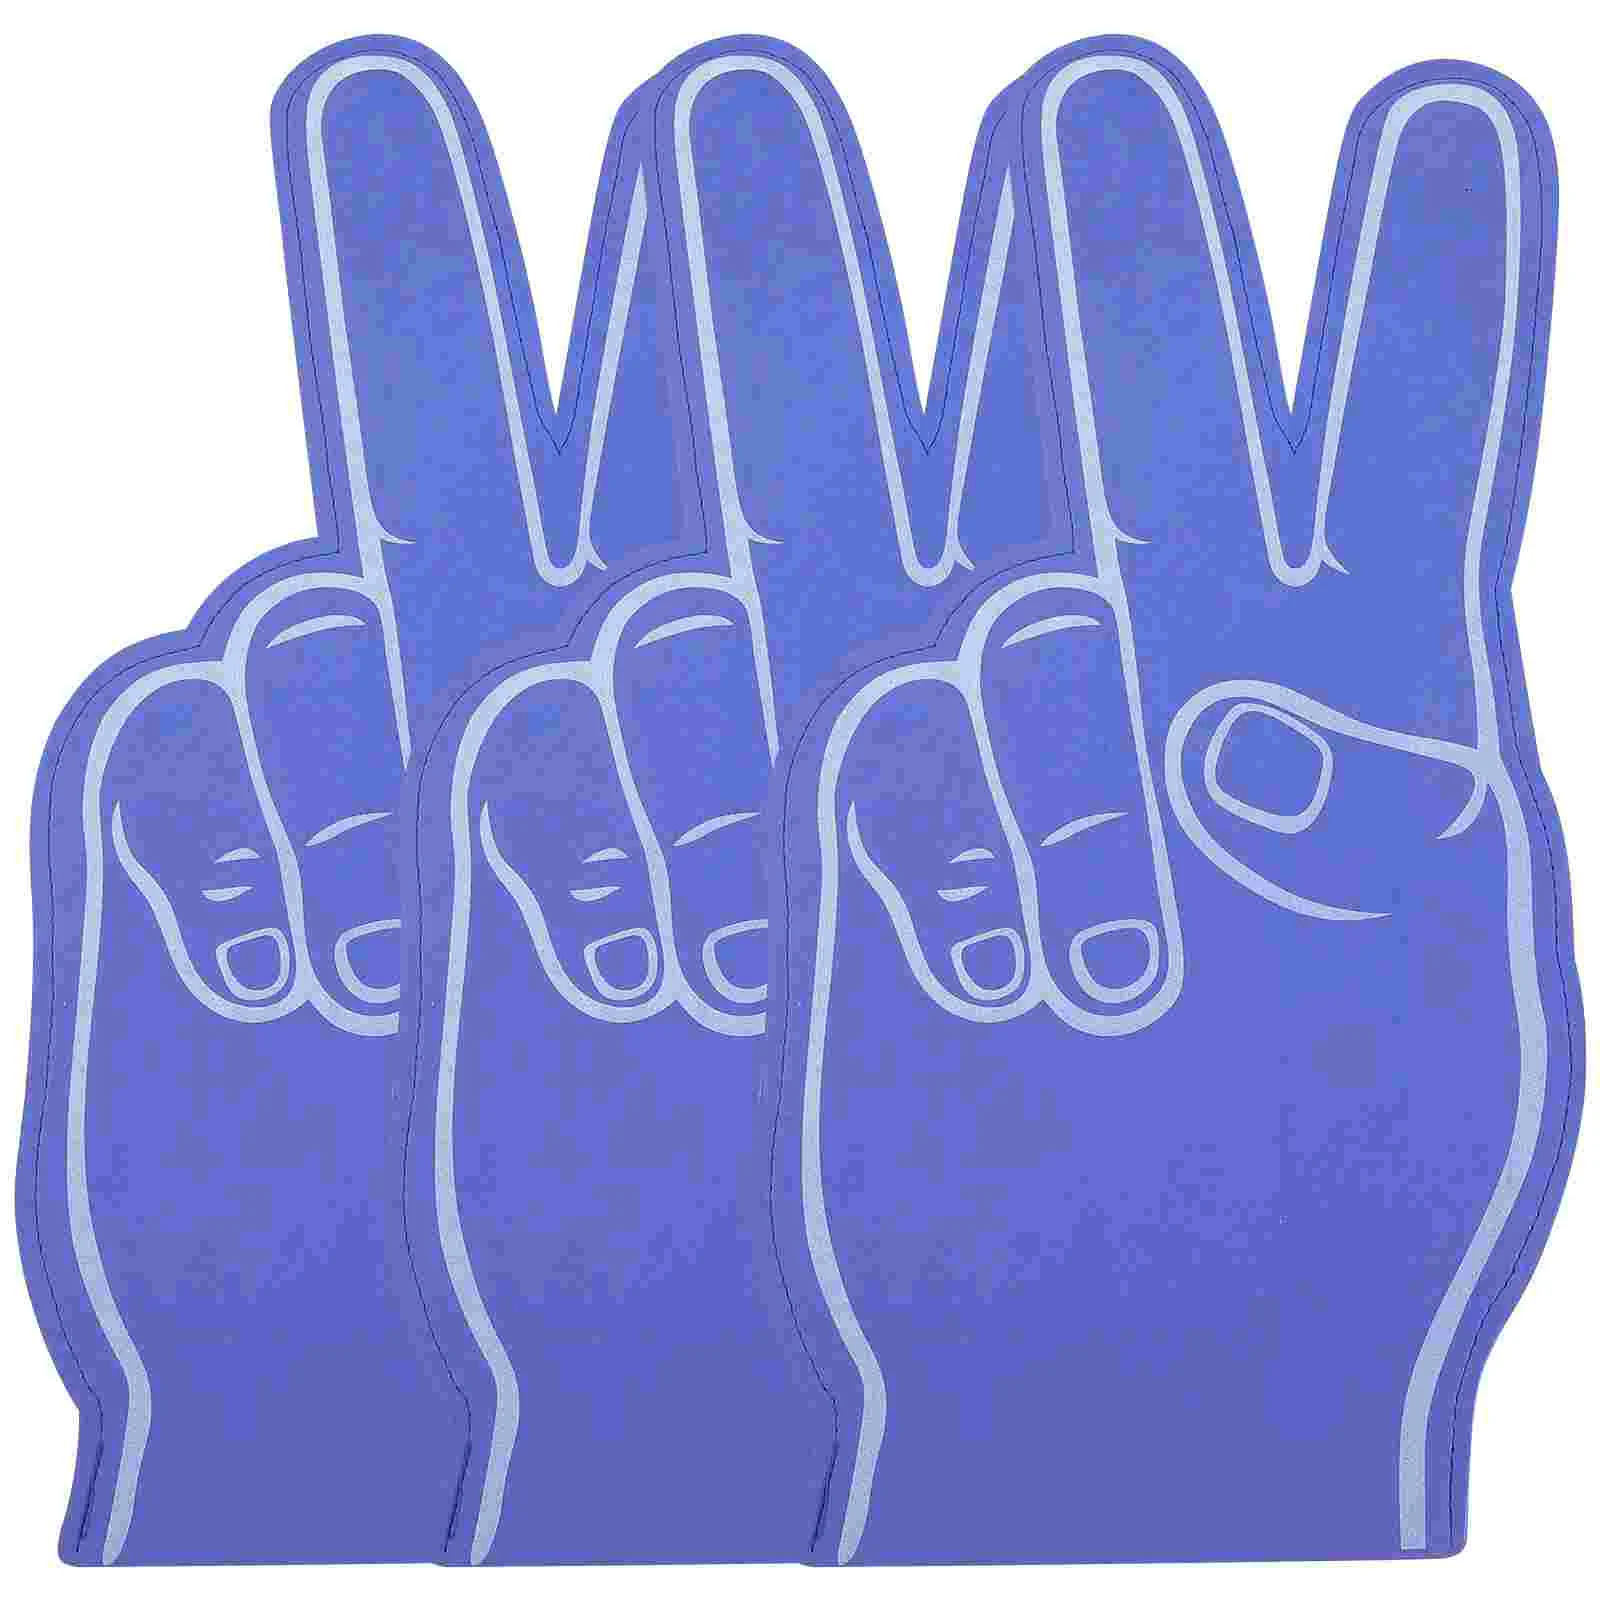 3Pcs Sports Cheering Foam Hand Sports Party Foams Finger Party Supplies for Competition